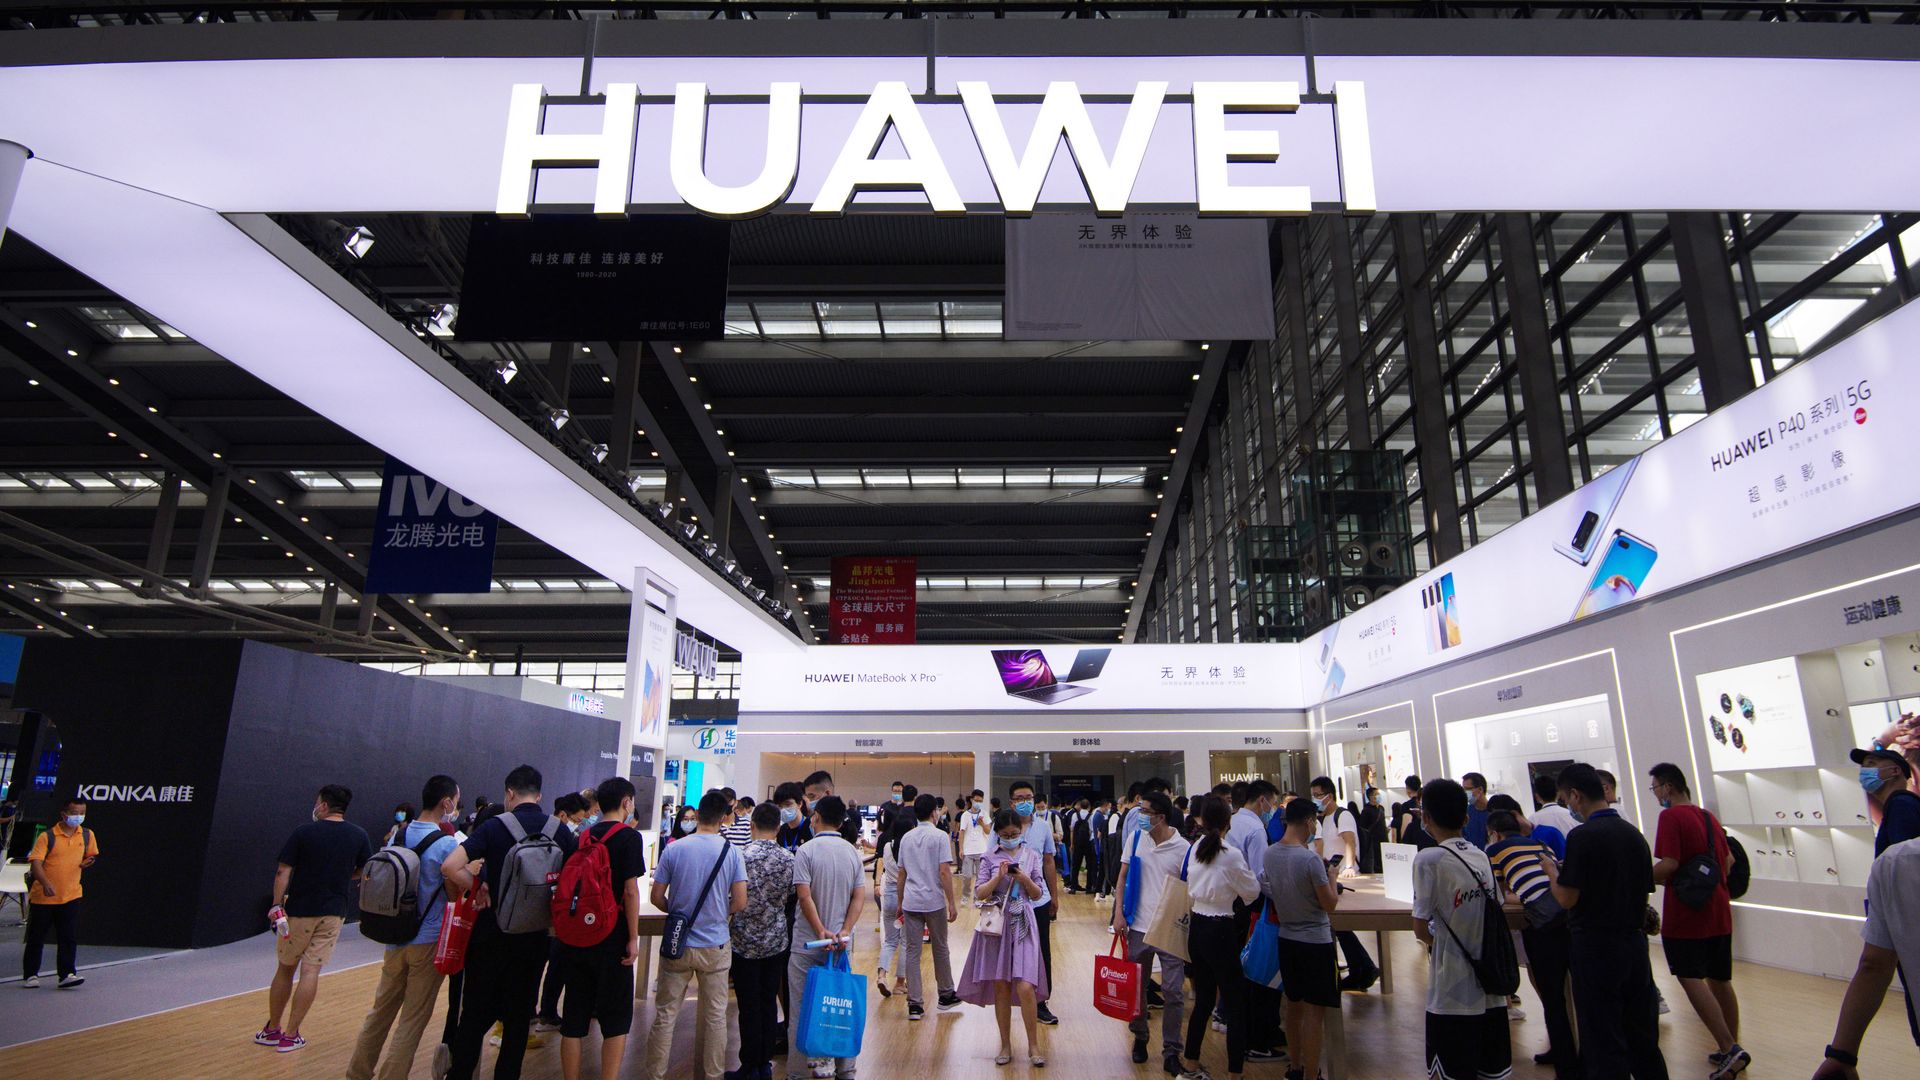 People visit a Huawei booth at a tech expo in China.